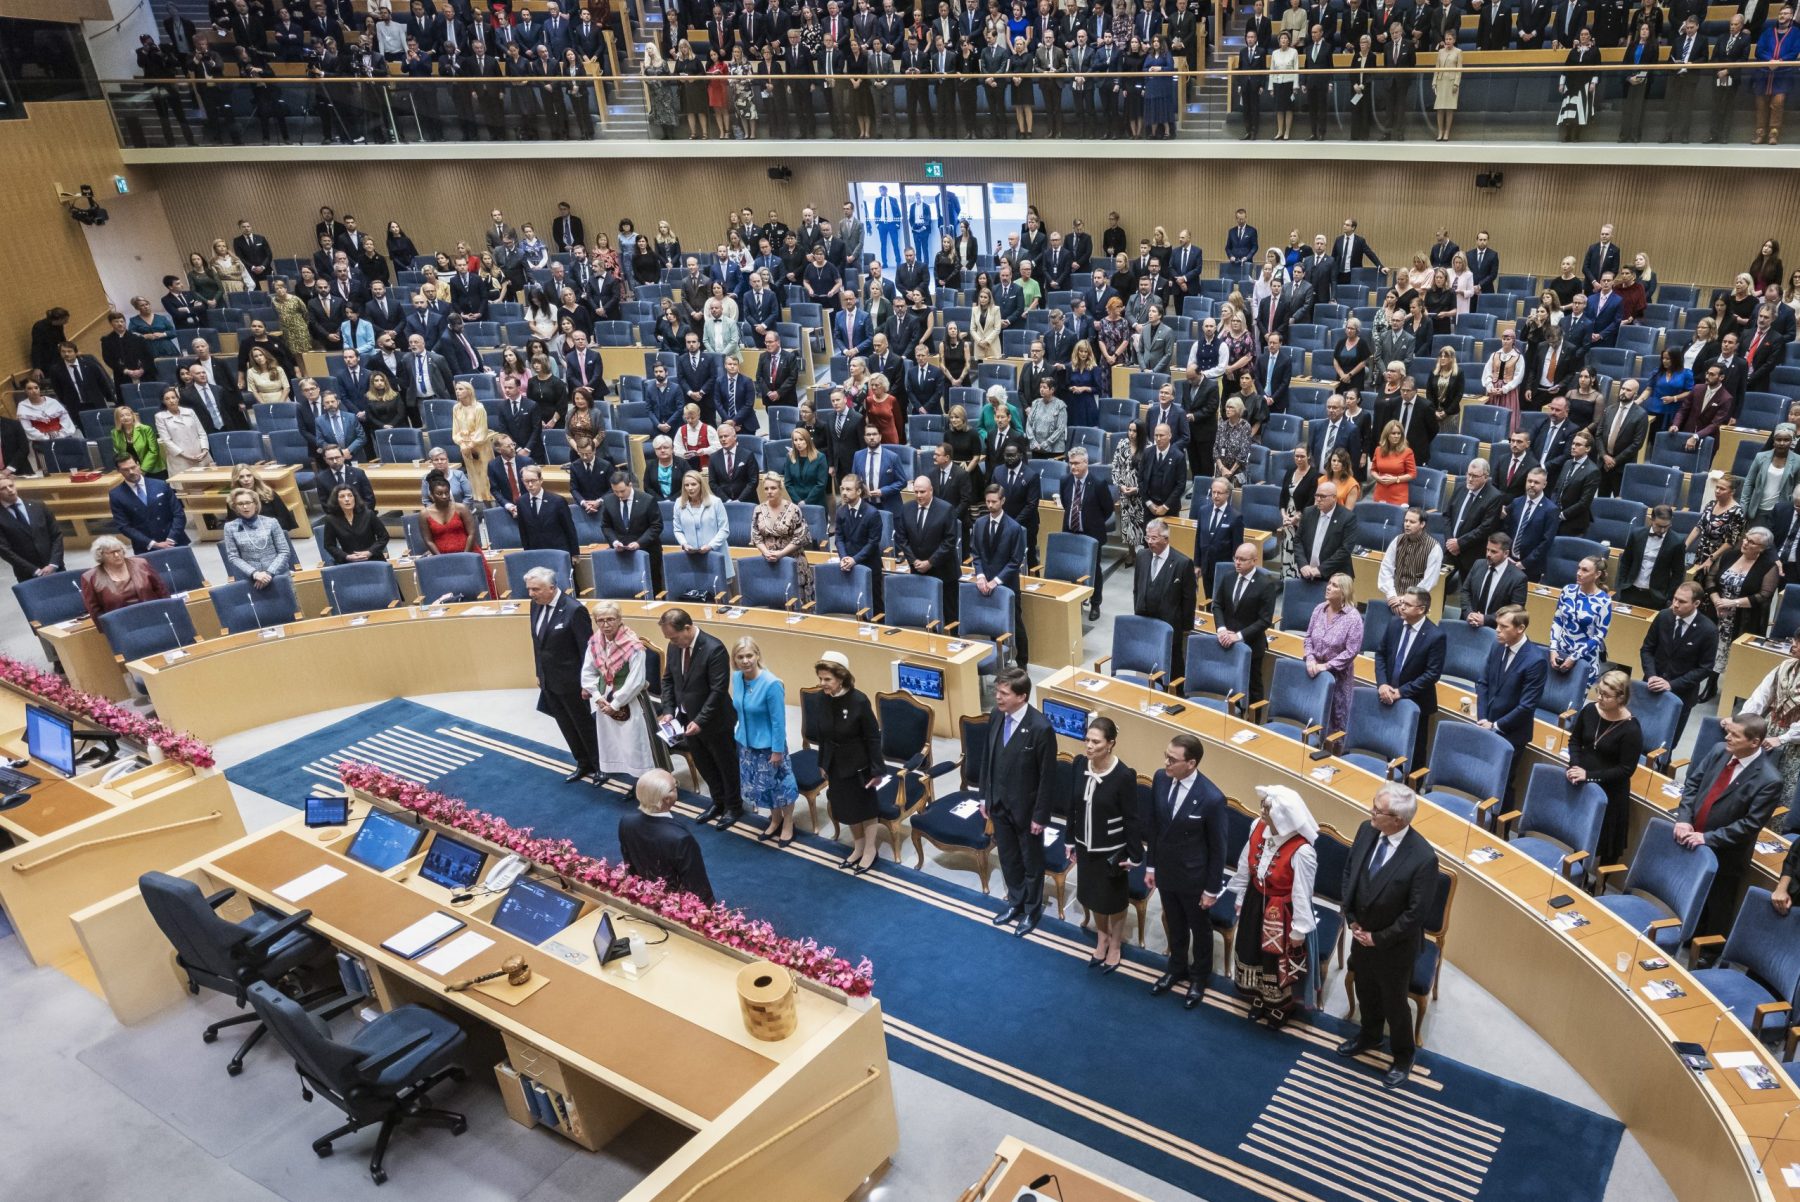 Opening of the parliamentary year by Swedish king Carl XVI Gustaf on 27 September 2022 (Press photo by Riksdagen)